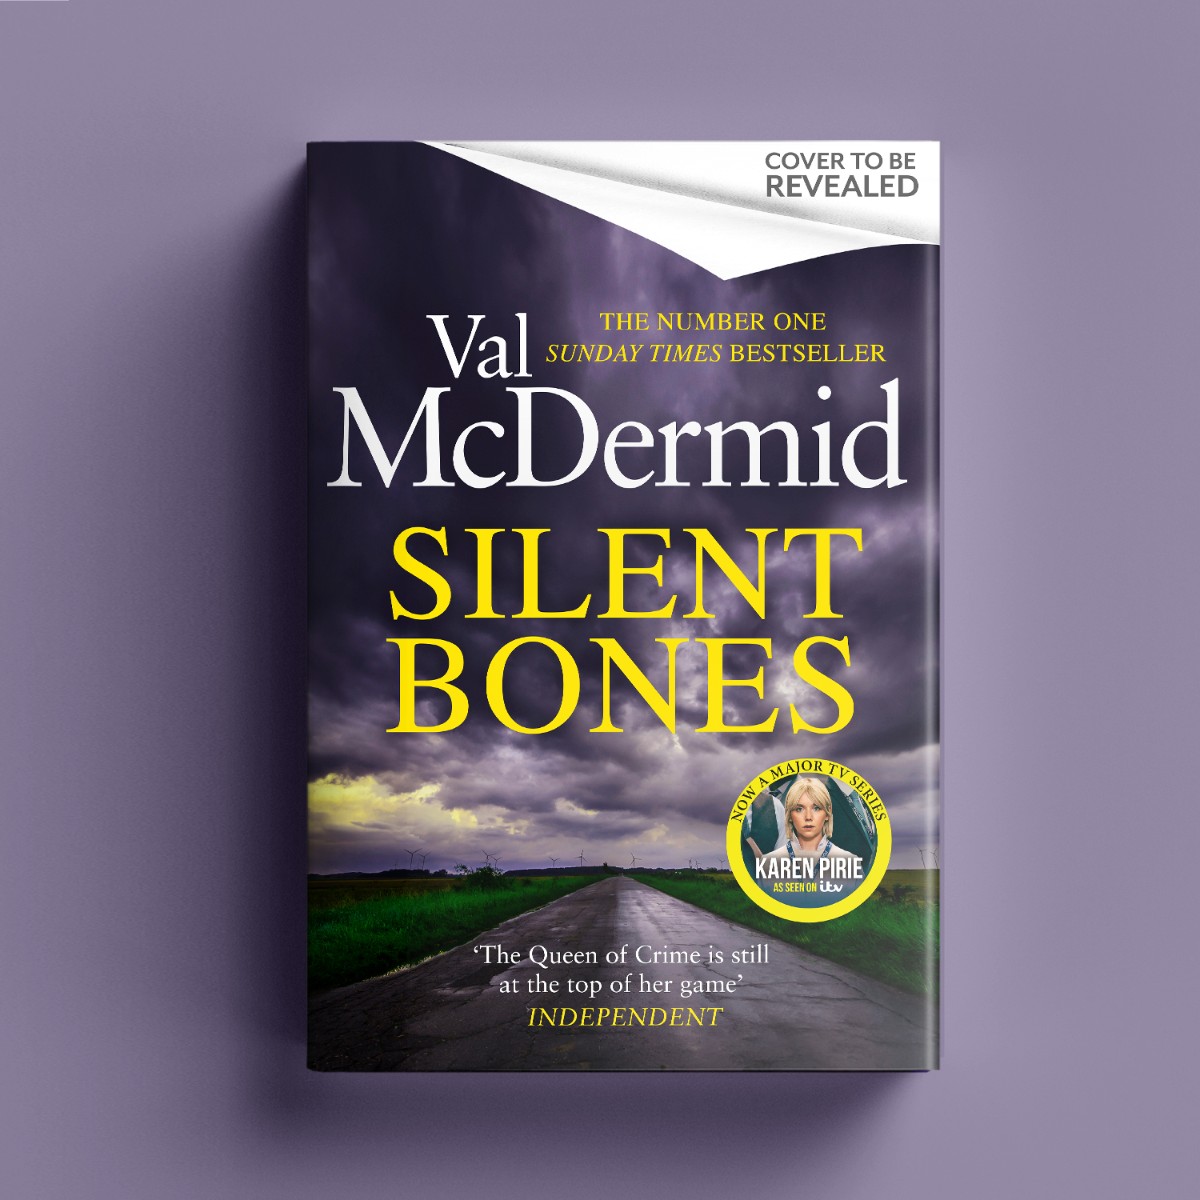 We're thrilled to share that the brand-new, iconic Karen Pirie thriller from bestseller @valmcdermid, Silent Bones, is coming this Autumn! Join Karen and the Mint and Daisy and find out just what happened in Montreal… Pre-order your copy now: brnw.ch/21wJjRW